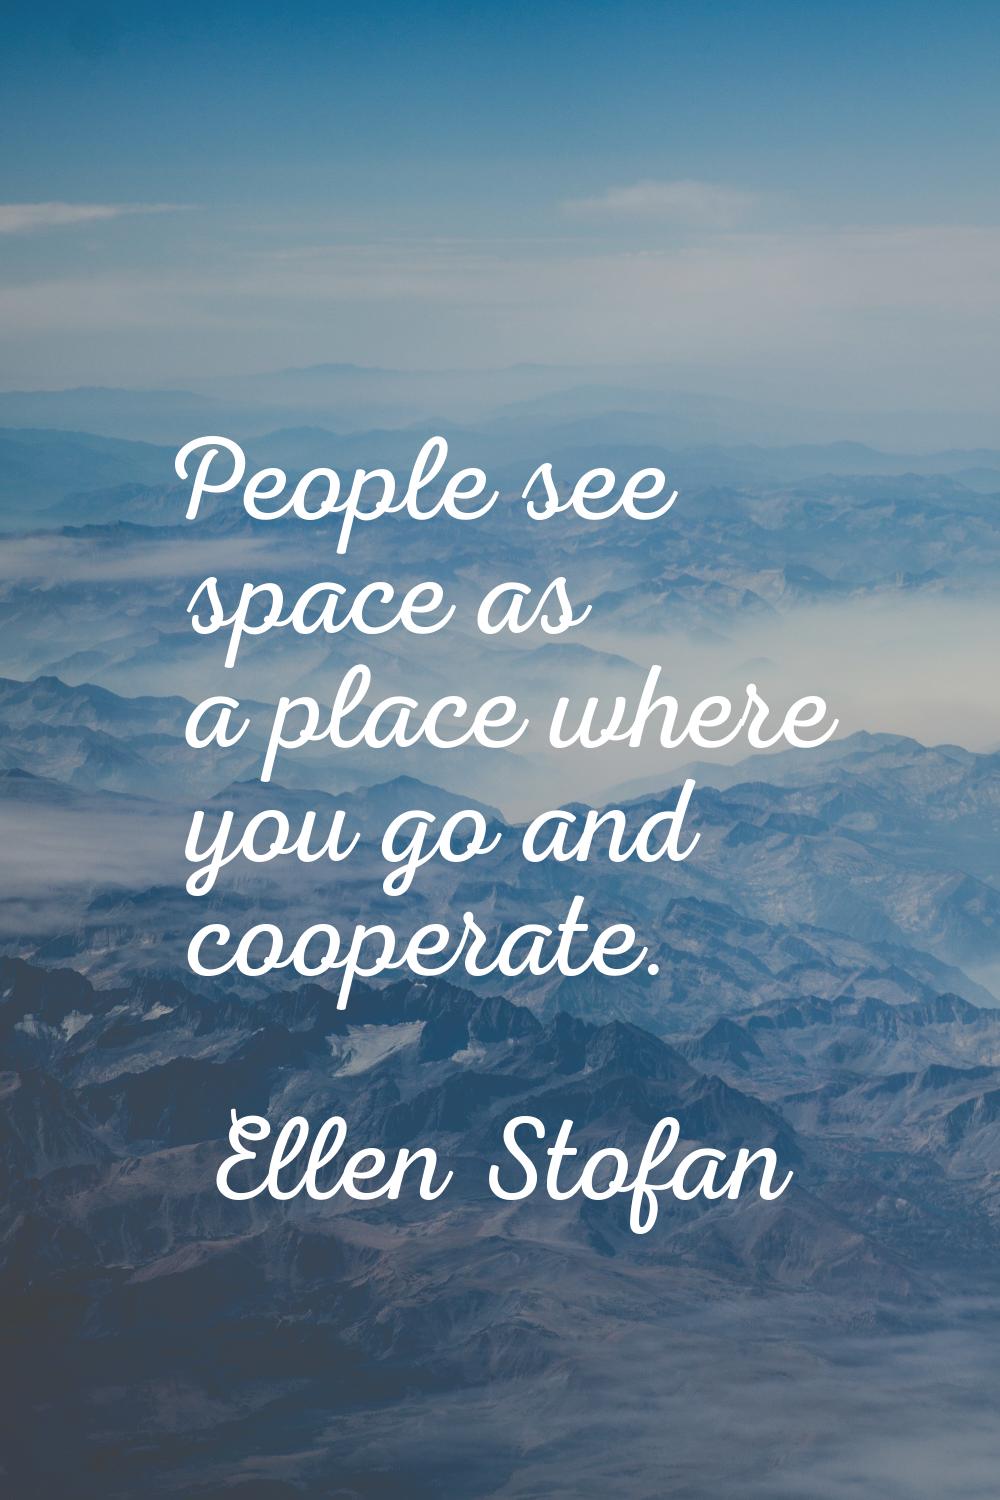 People see space as a place where you go and cooperate.